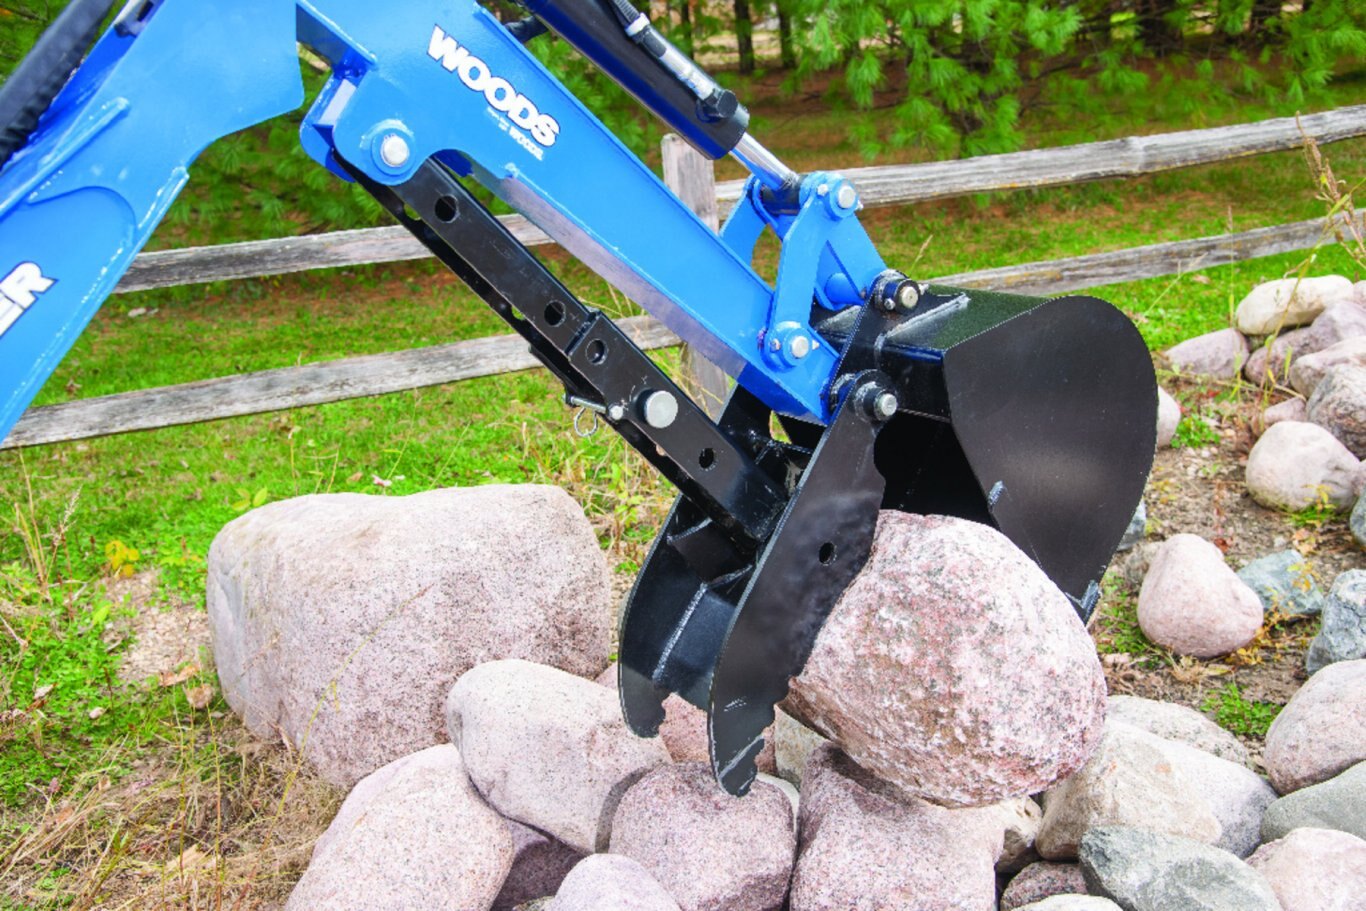 Woods Subcompact and Compact Backhoes